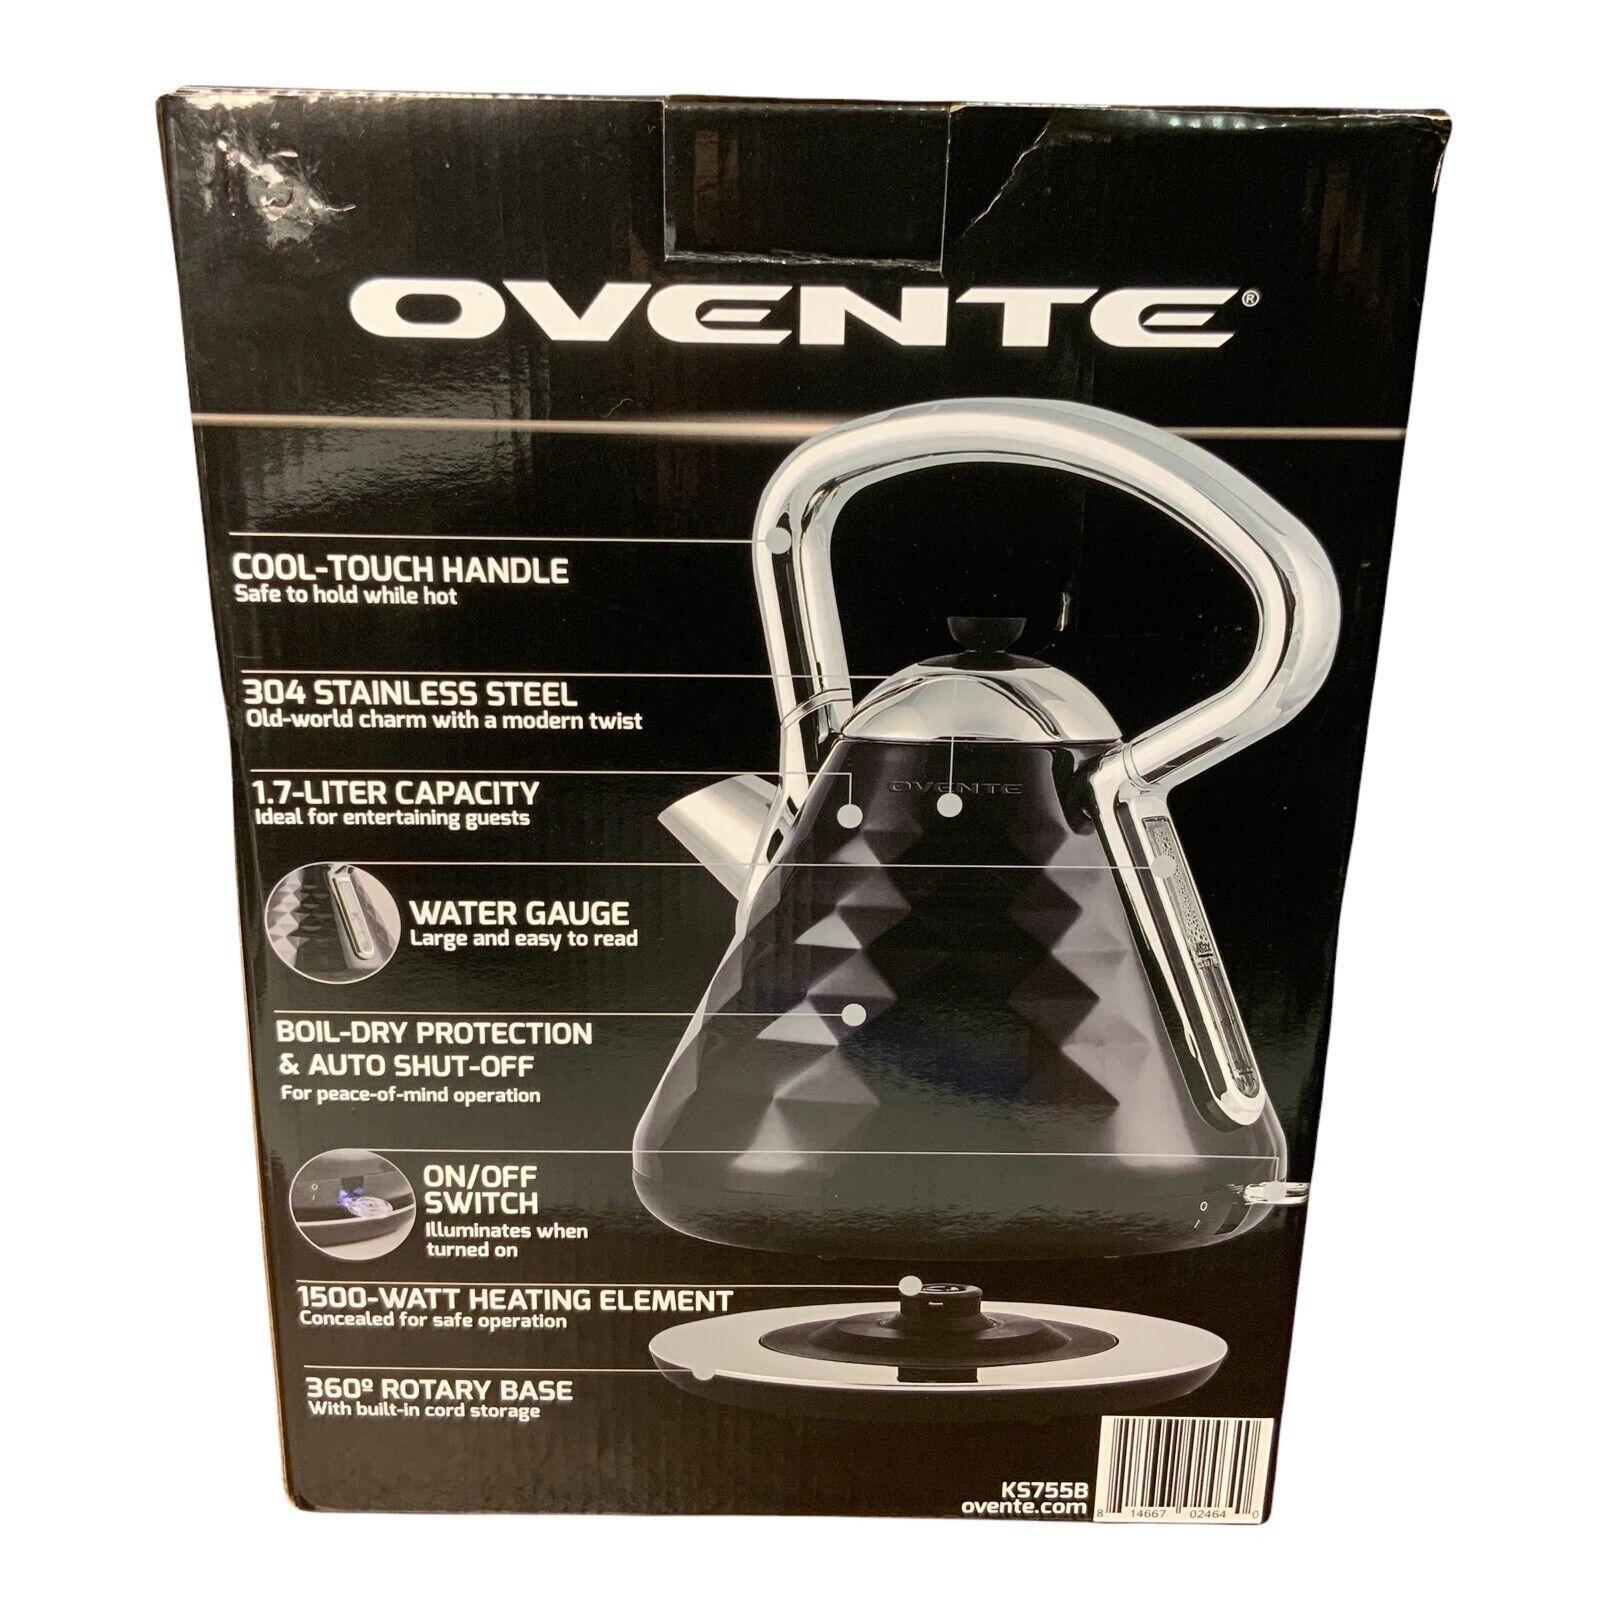 Ovente Cleo 1.7 Quarts Stainless Steel Electric Tea Kettle